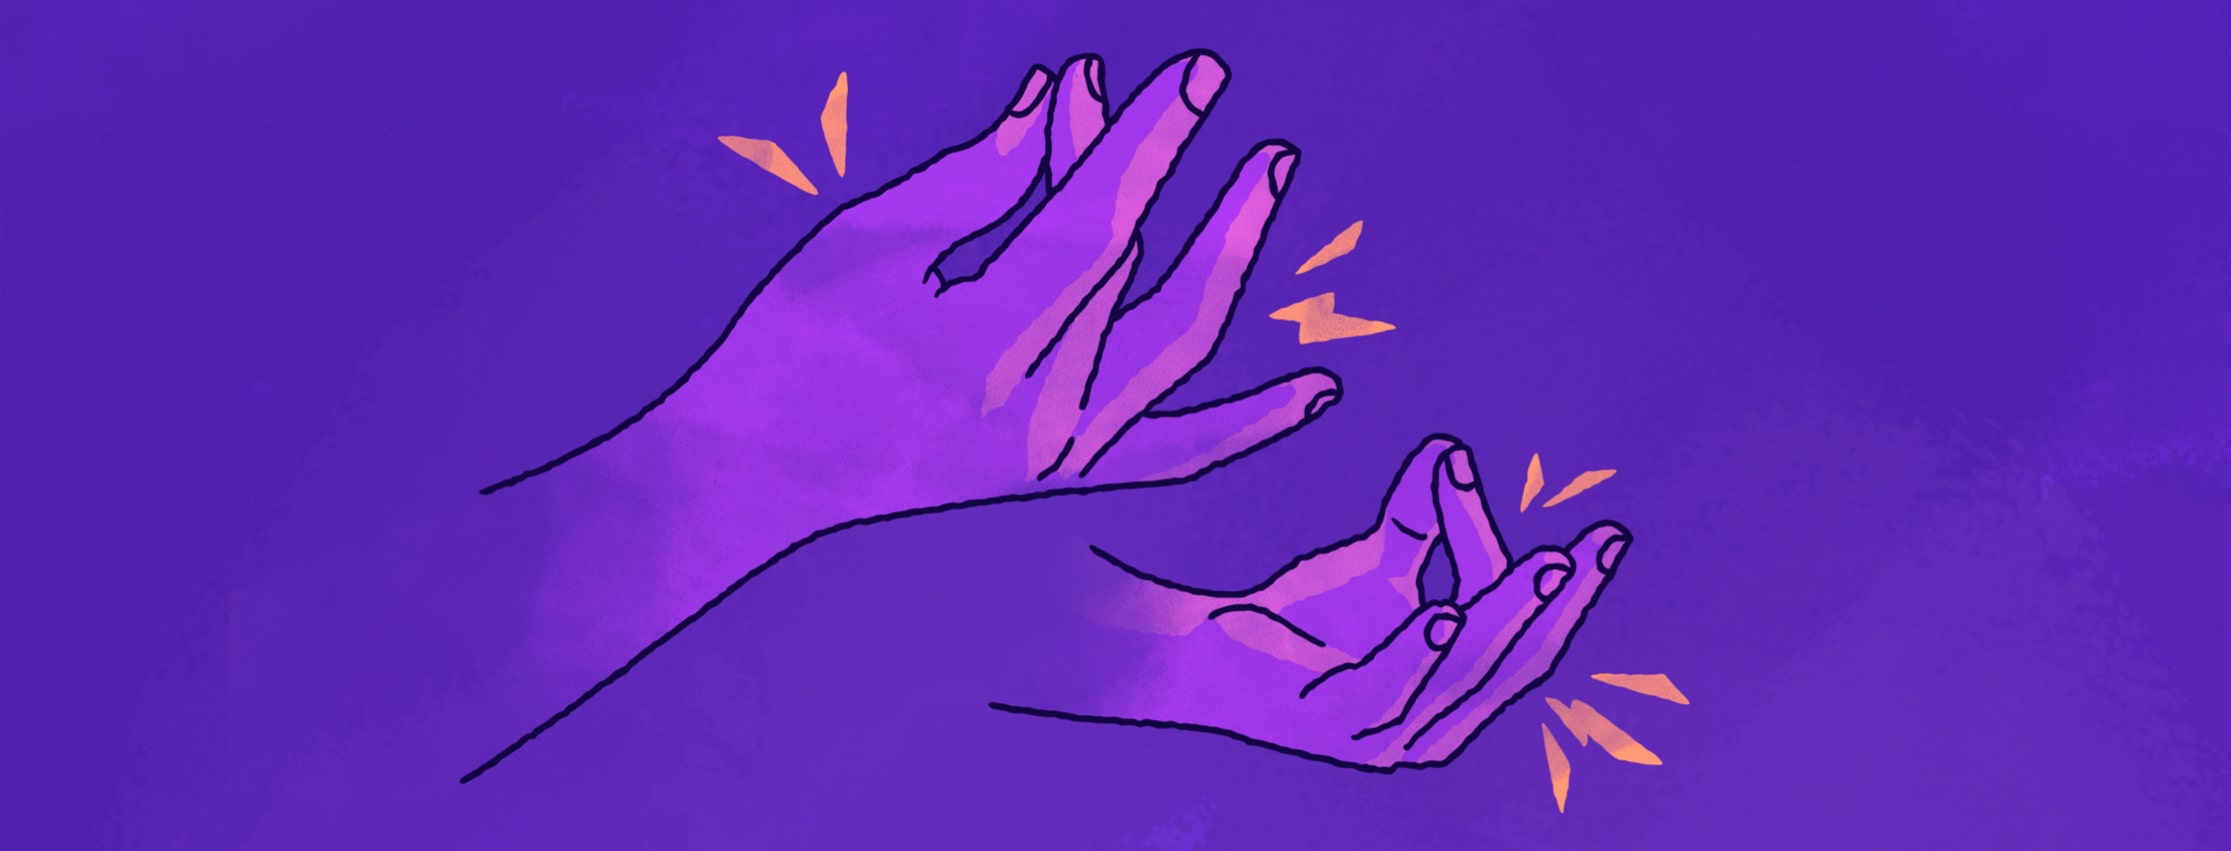 Hands engaged in finger stretches to help alleviate pain